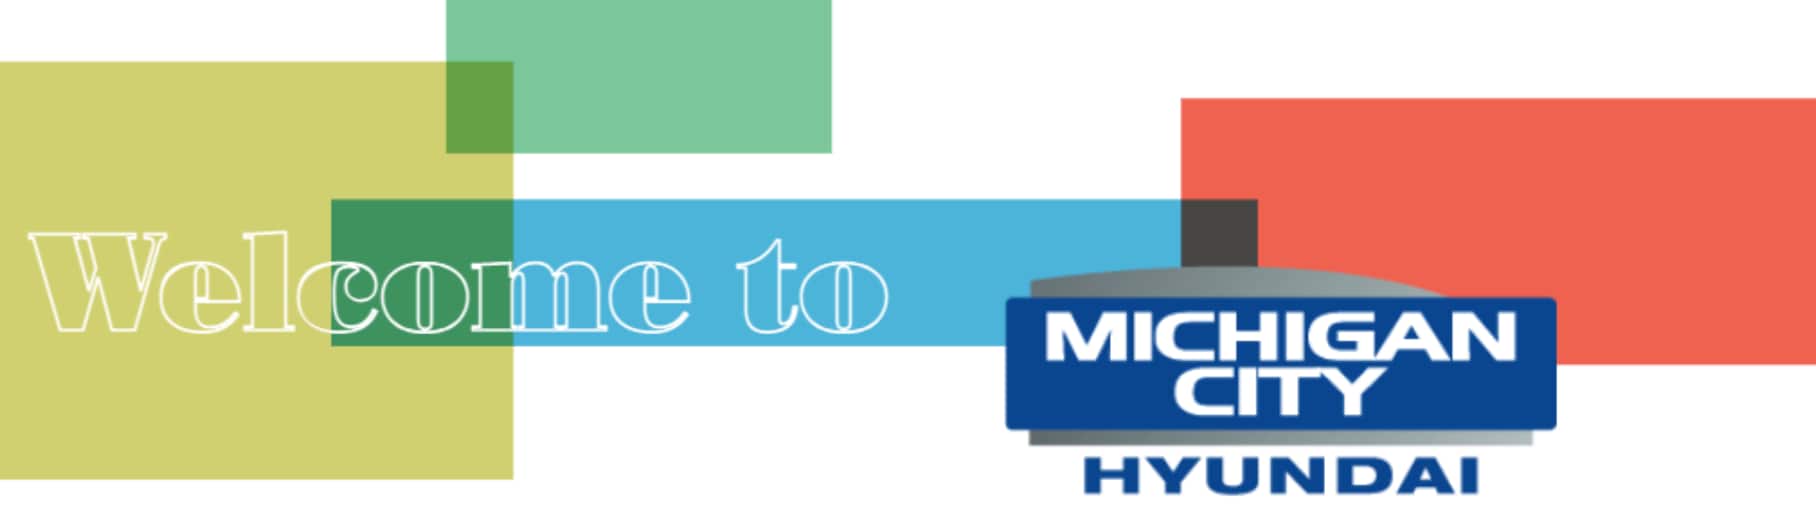 About Michigan City Hyundai: Our Commitment to You